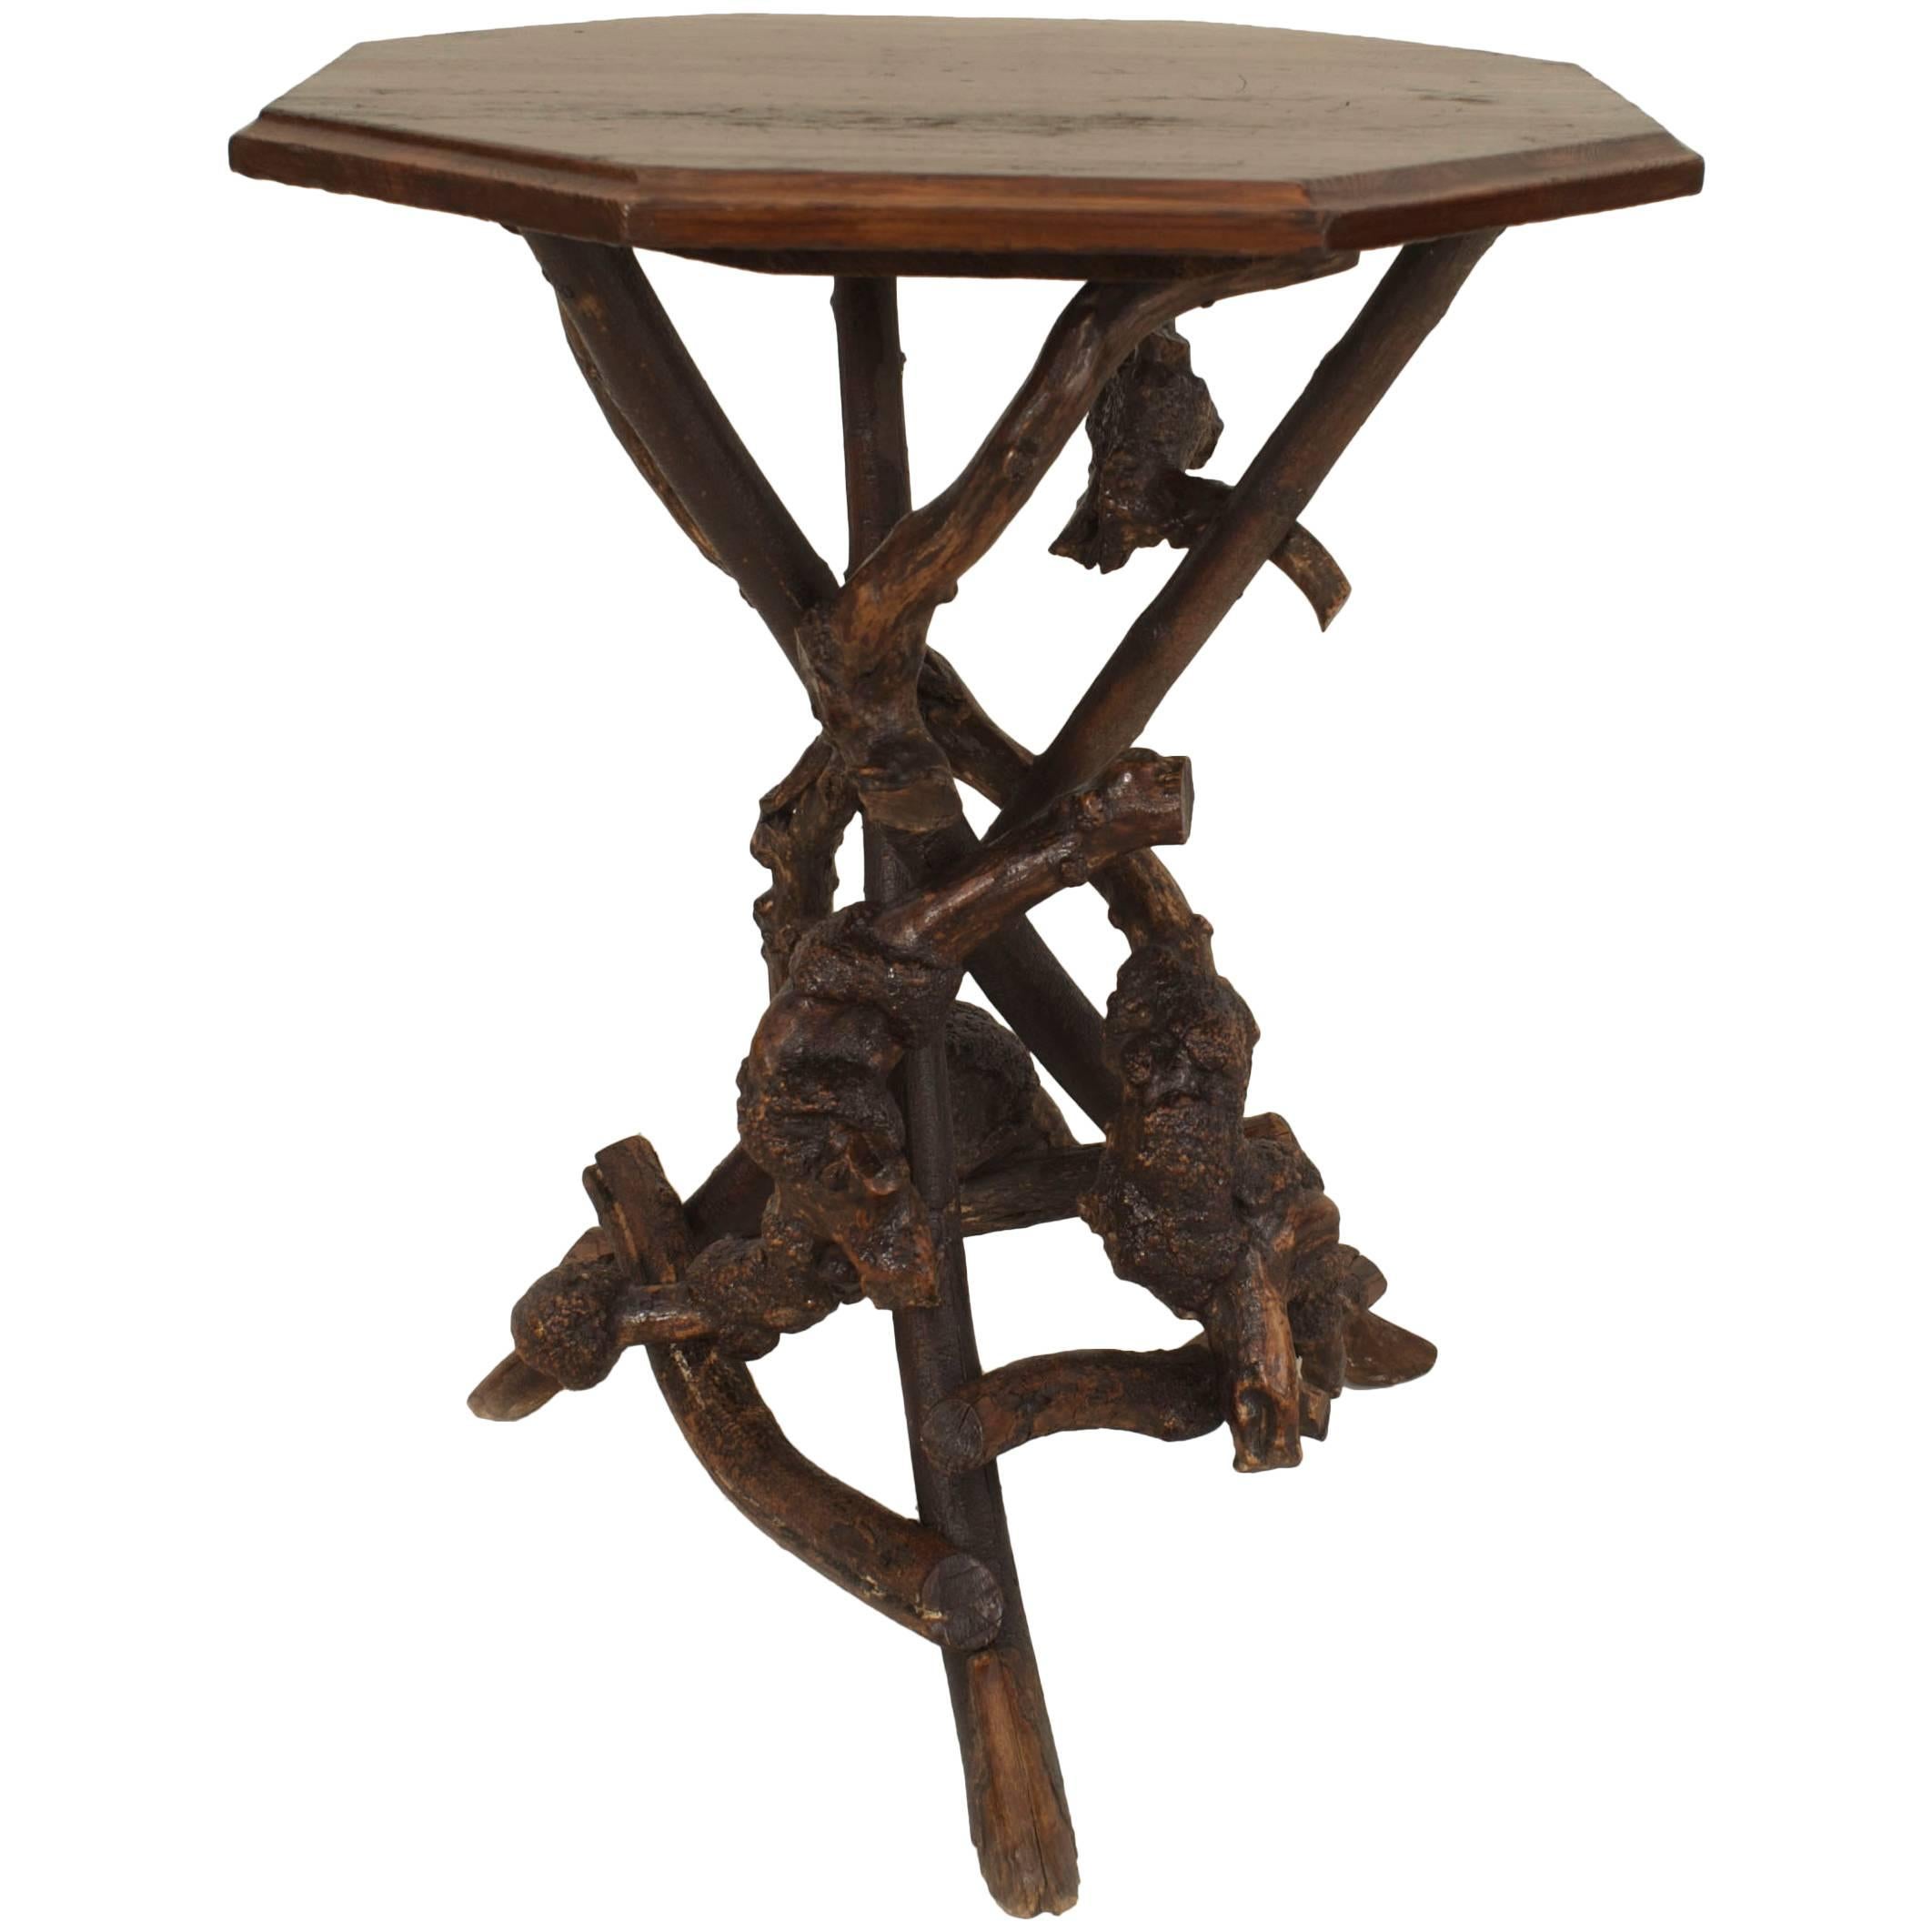 1920s American Rustic Adirondack Oak End Table with Twig and Root Base